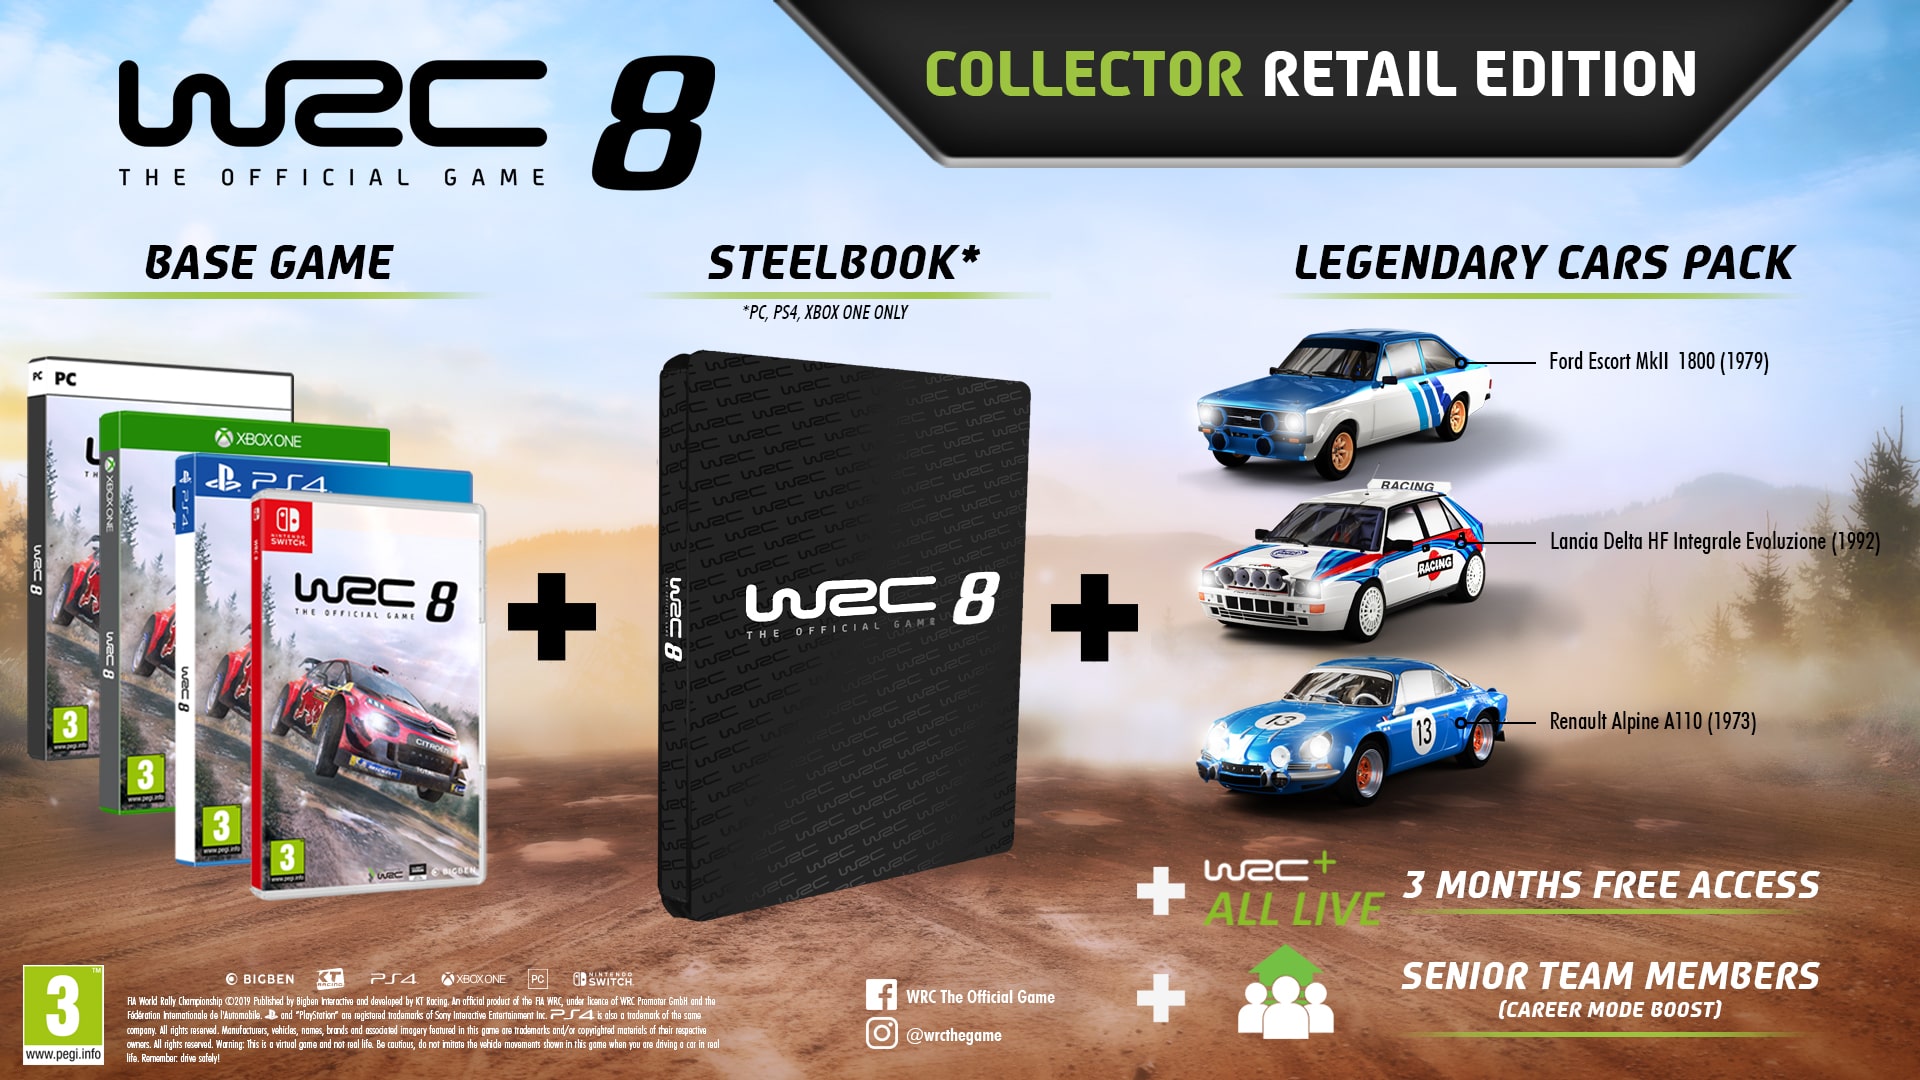 WRC 8 Collector Edition Image